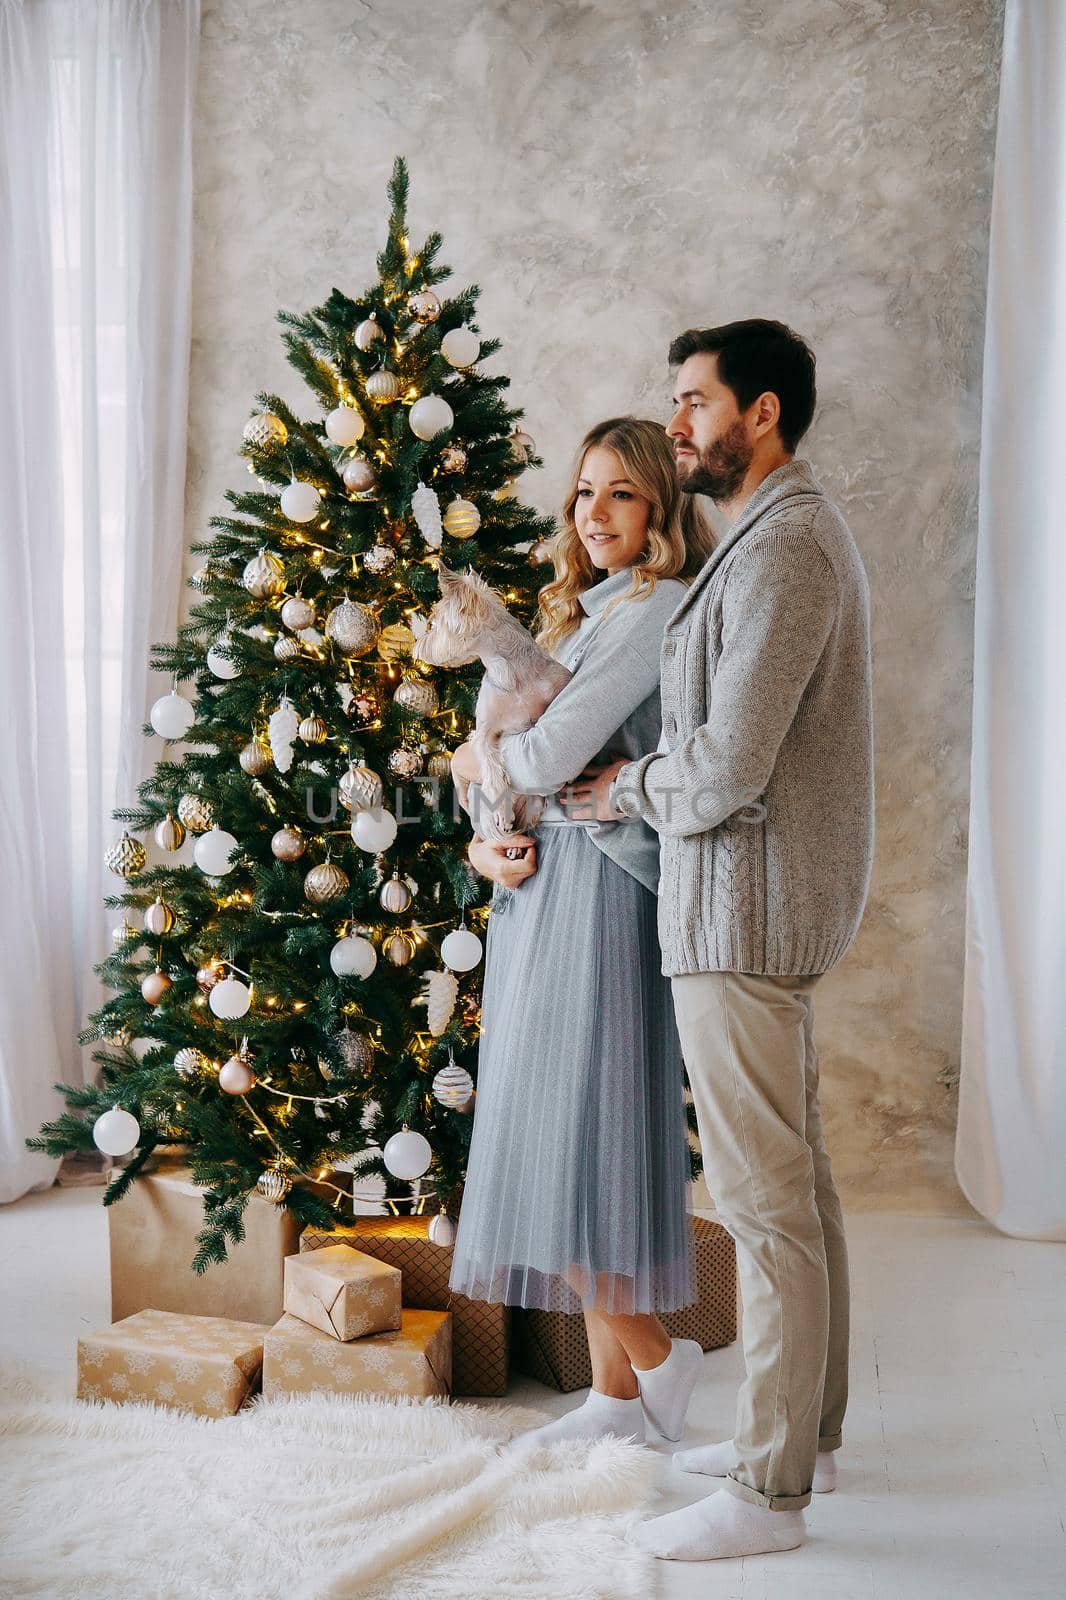 A happy couple in love - a man and a woman. A family in a bright New Year's interior with a Christmas tree.